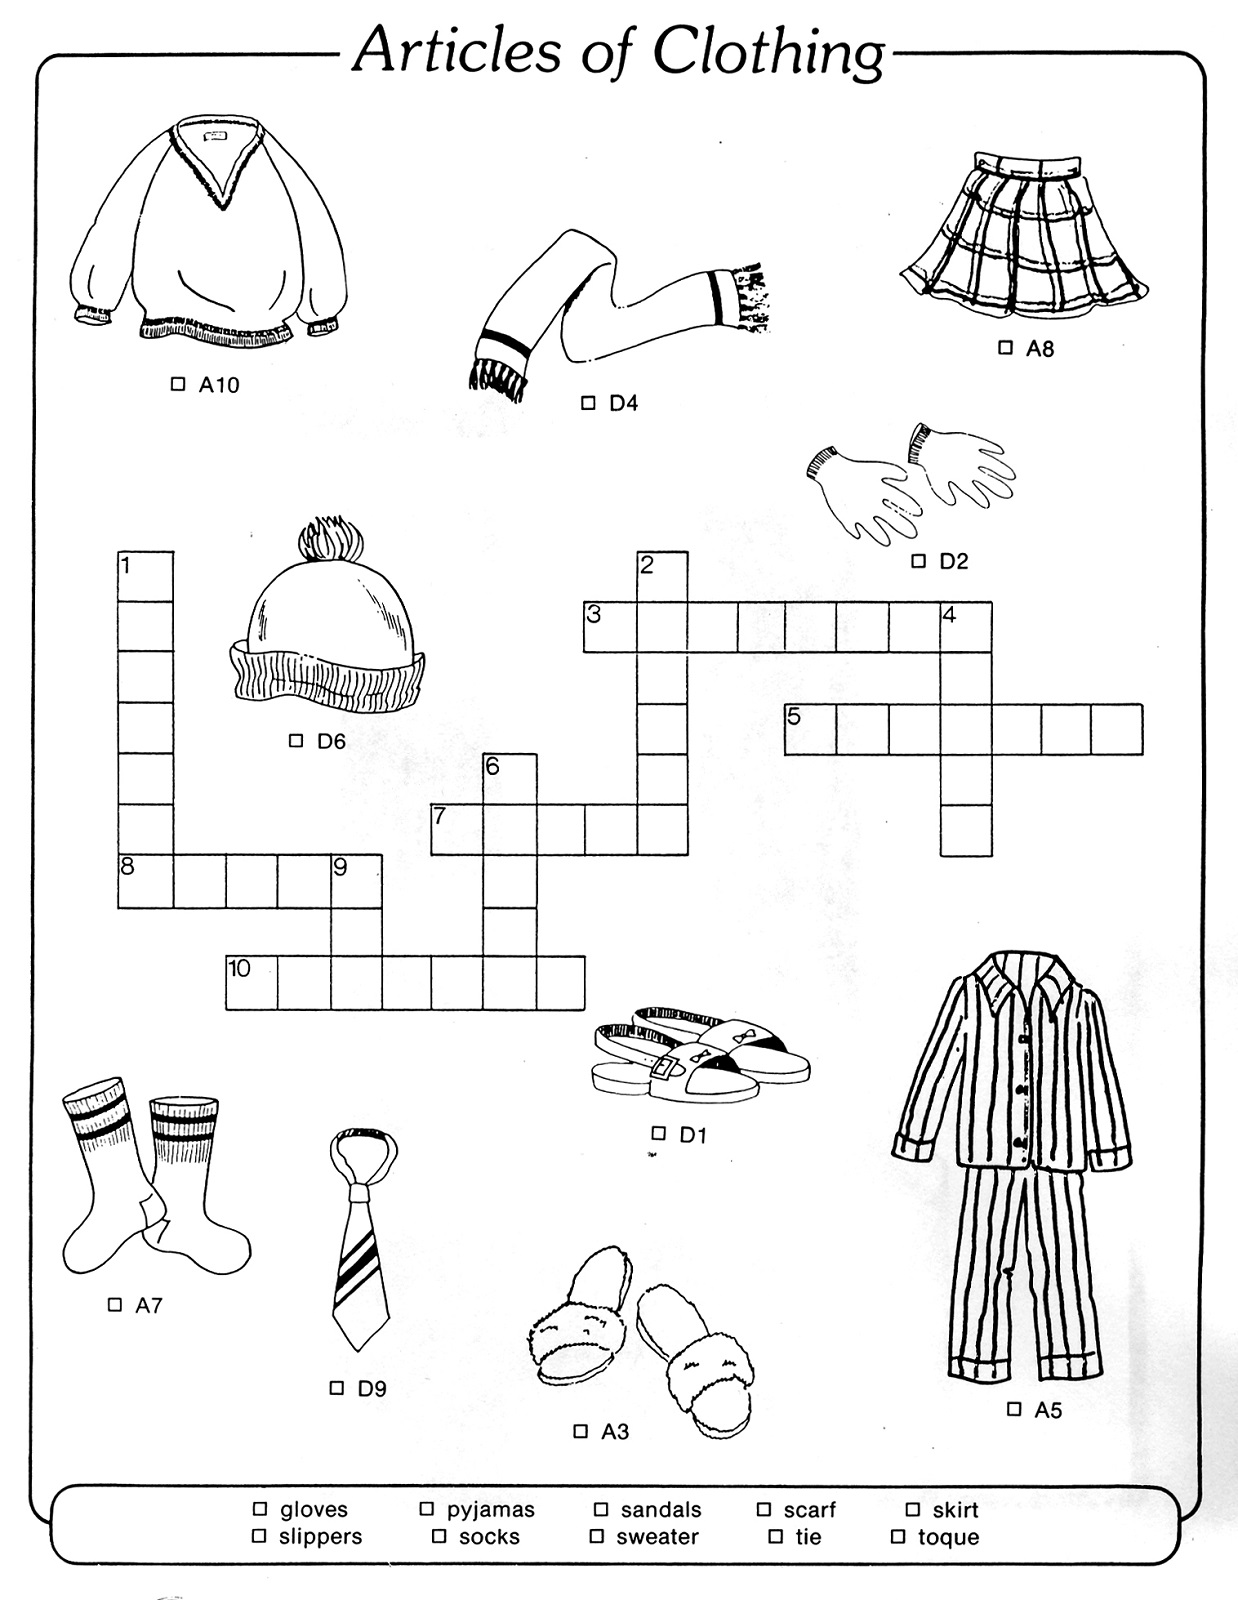 easy-crossword-puzzles-for-kids-clothing